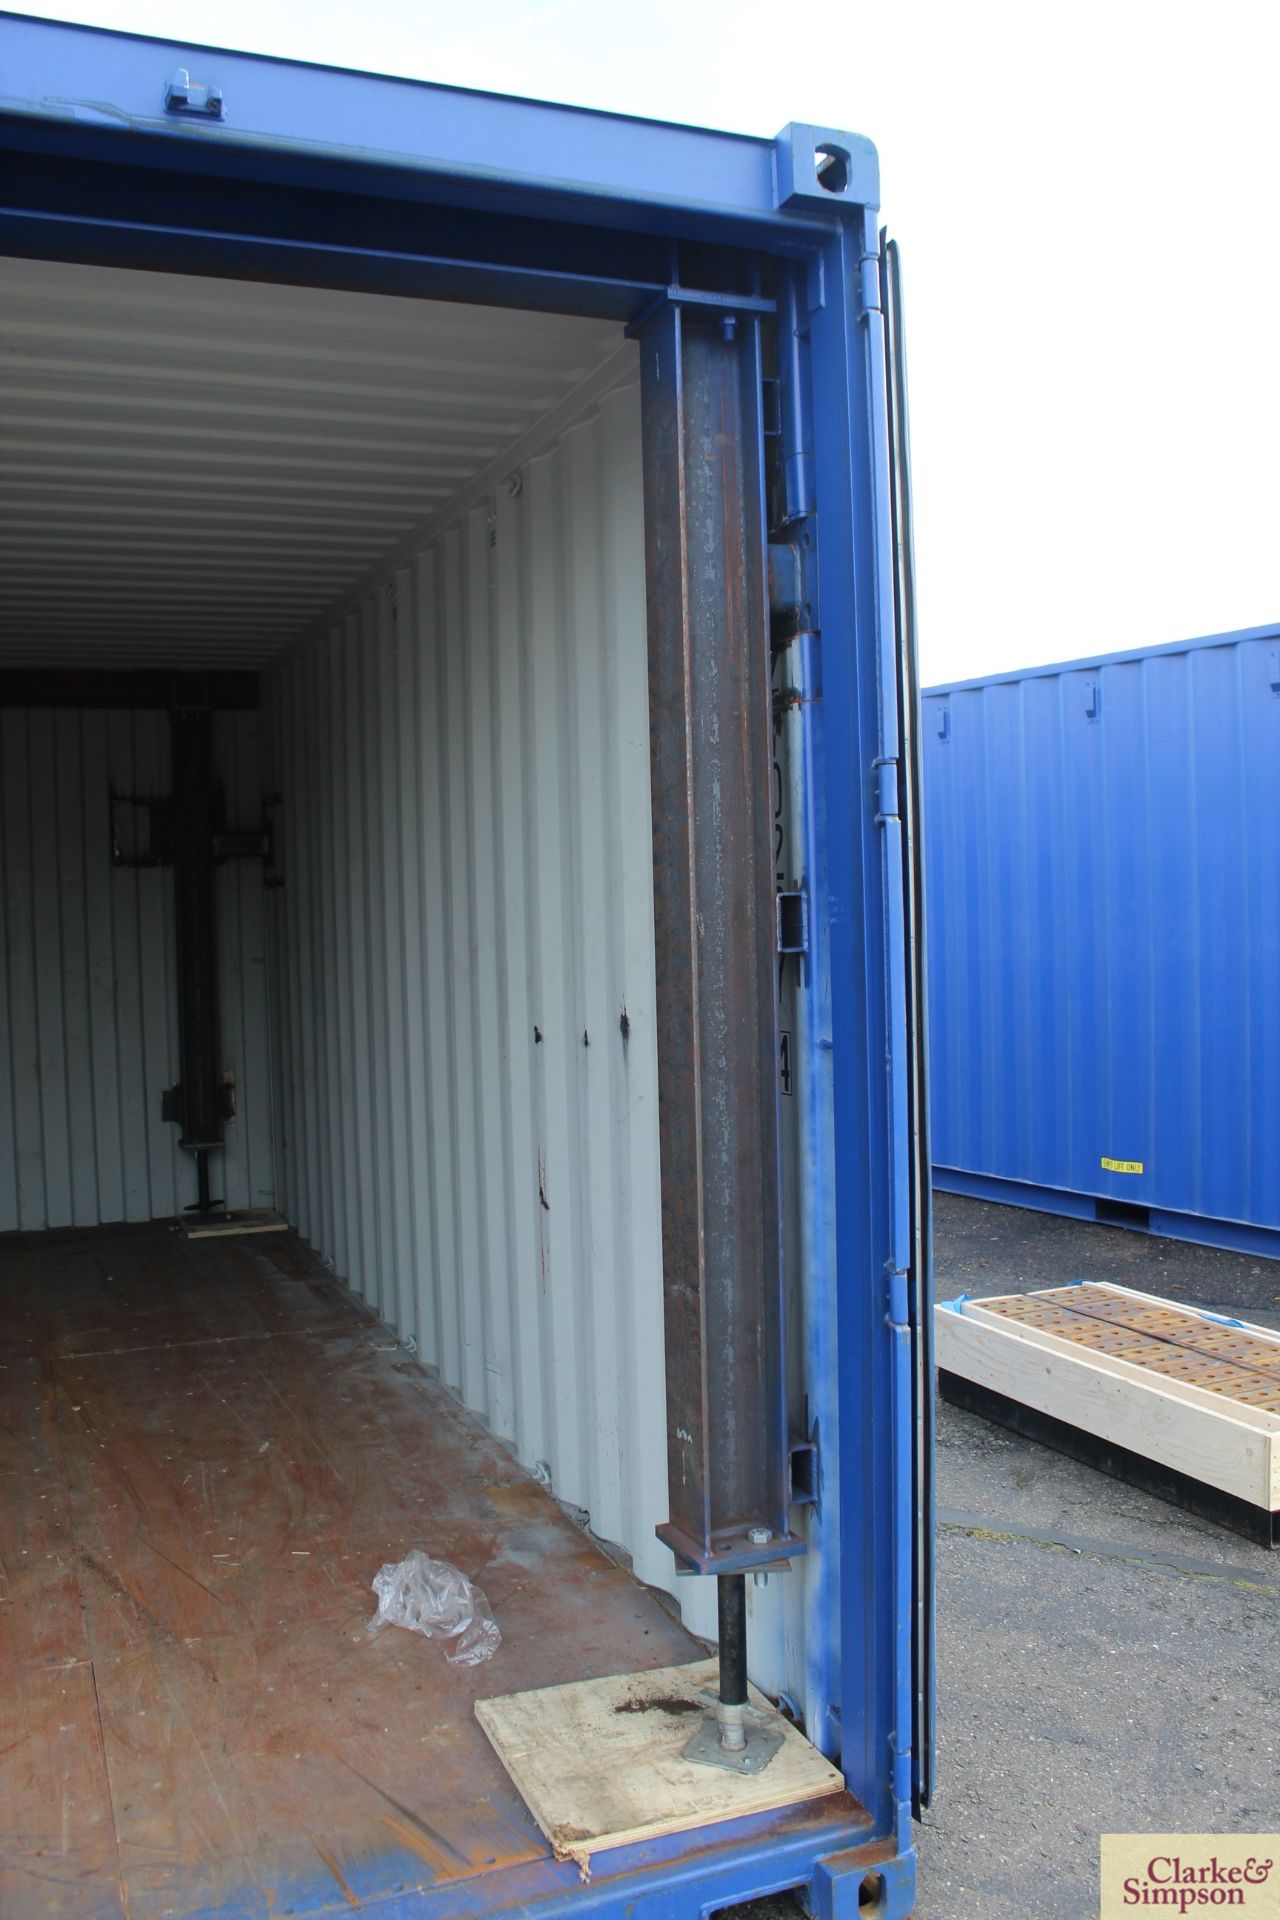 20ft x 9ft6in high shipping container. 2019. Partially reinforced to interior to include plates - Image 12 of 19